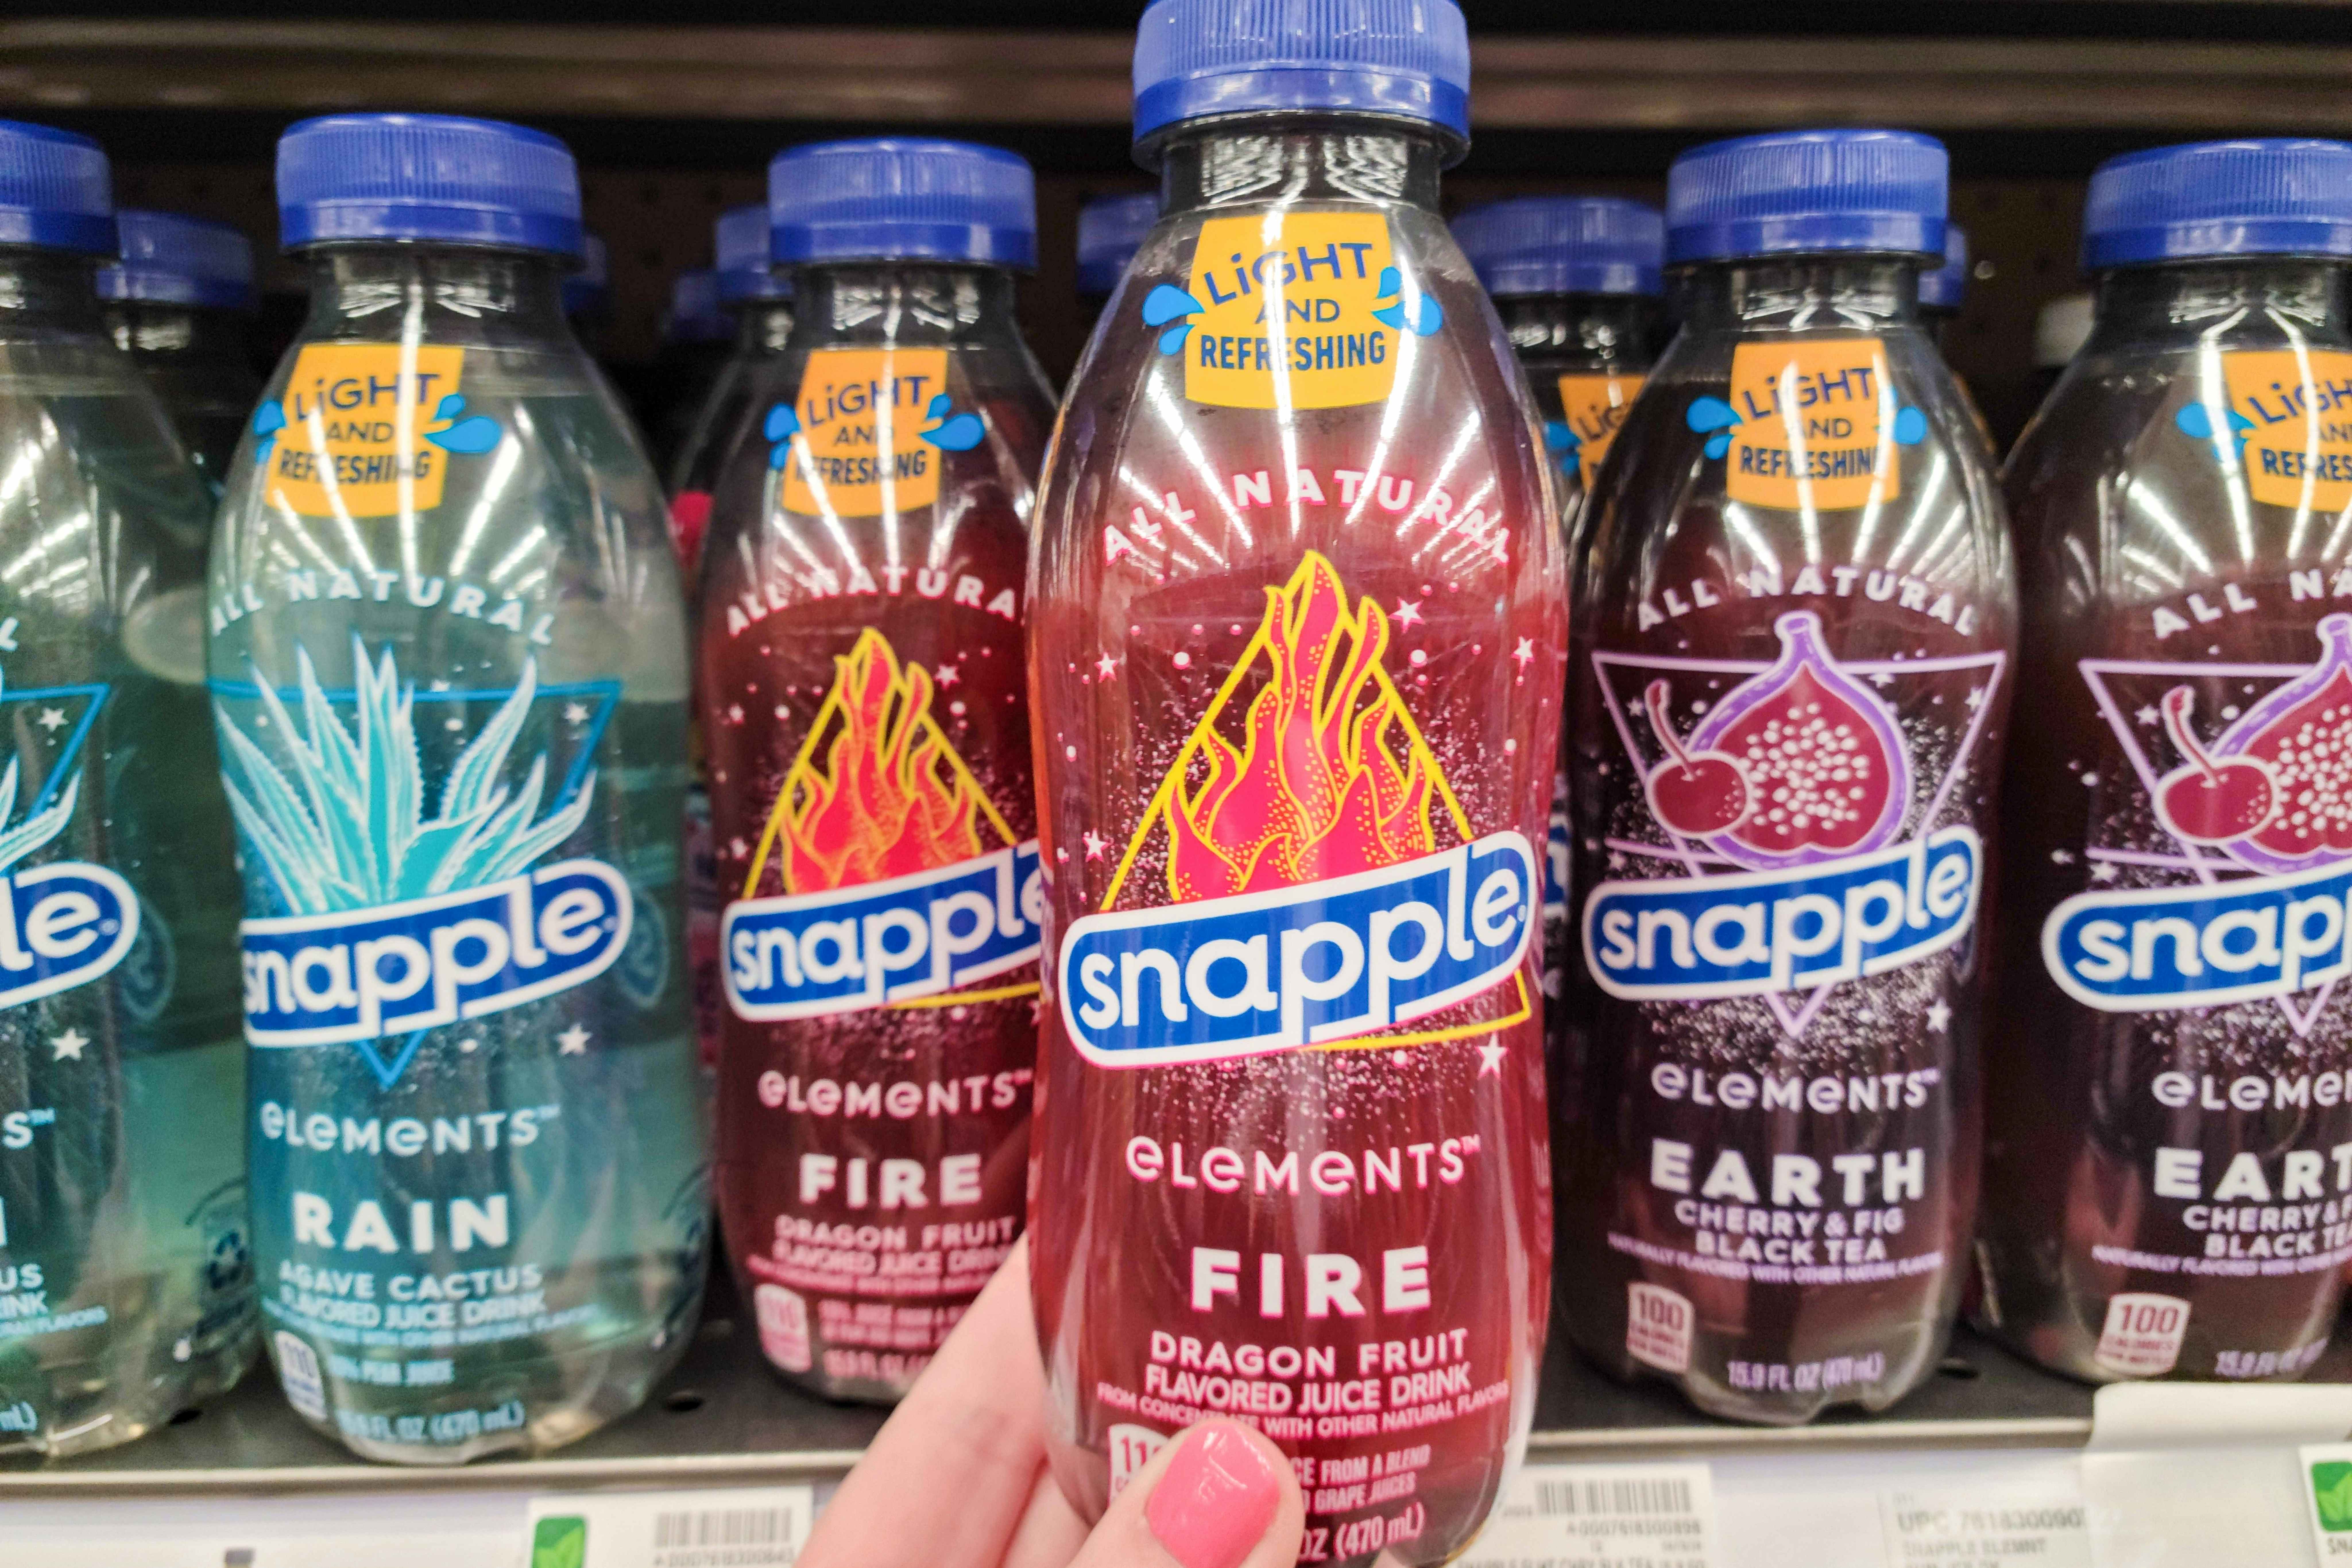 5 Free Snapple Elements Drinks at Kroger